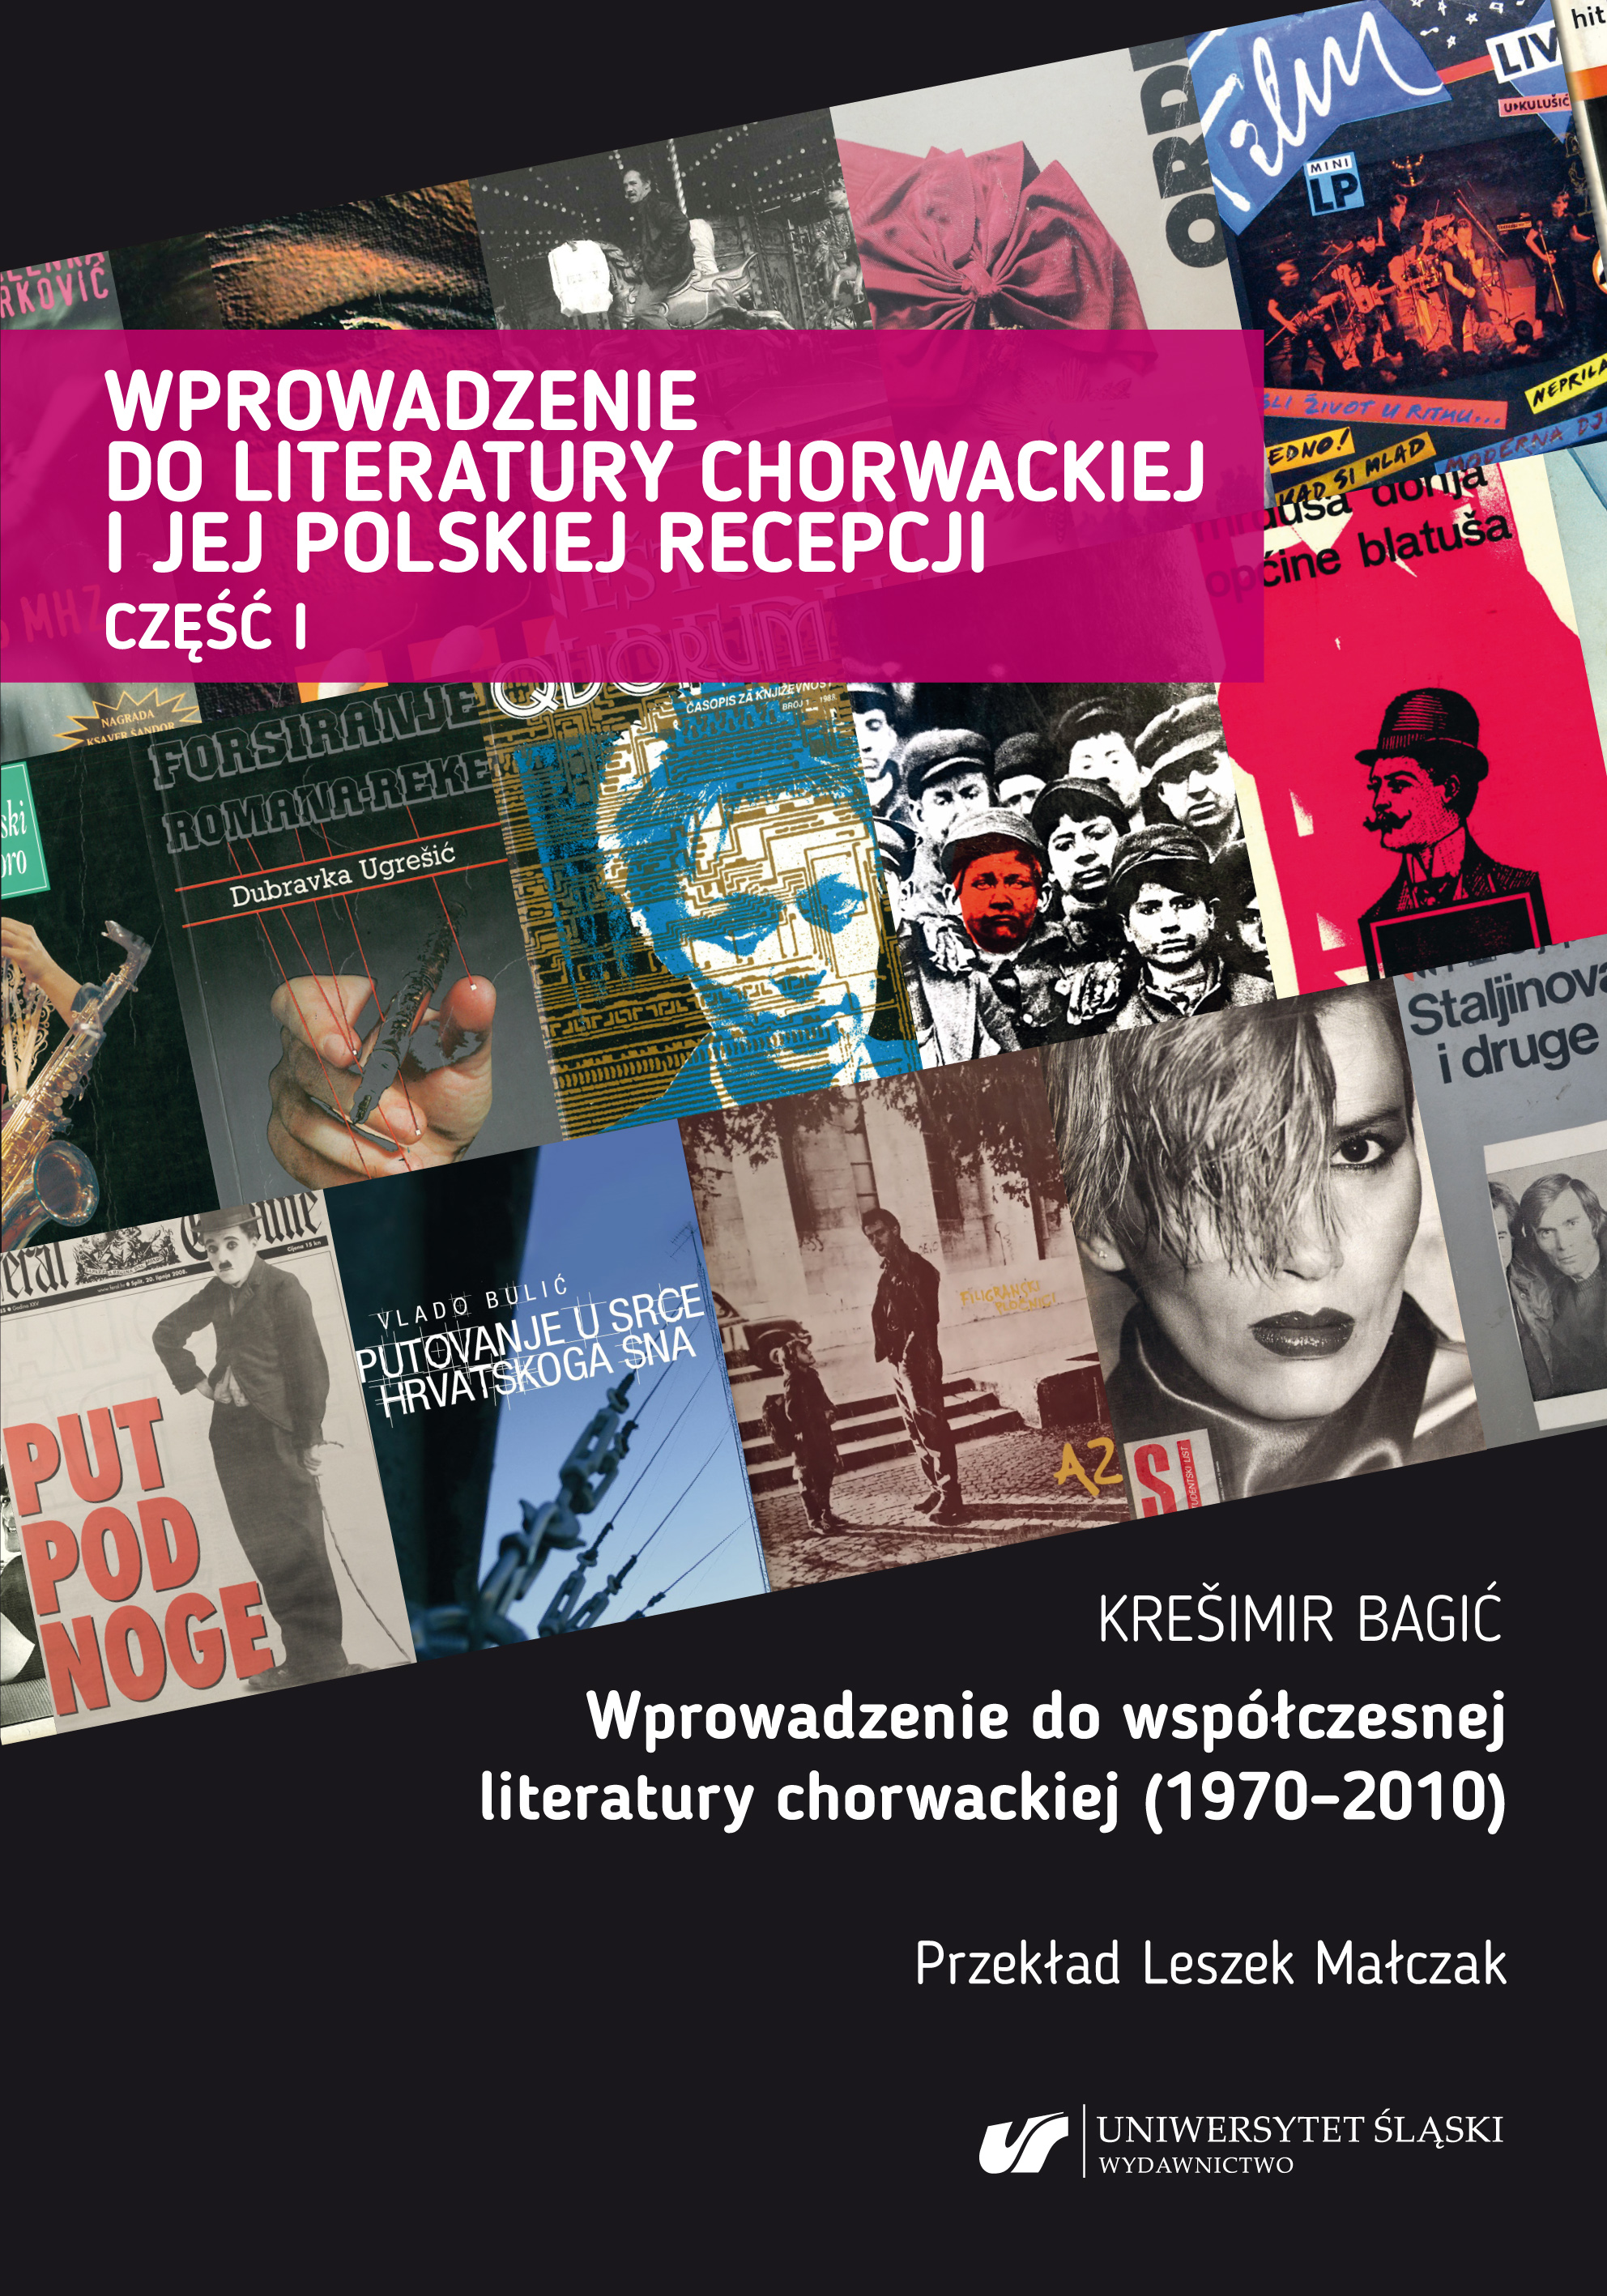 Introduction to Croatian Literature and its Polish Reception. Part 1: Introduction to Contemporary Croatian Literature (1970–2010)